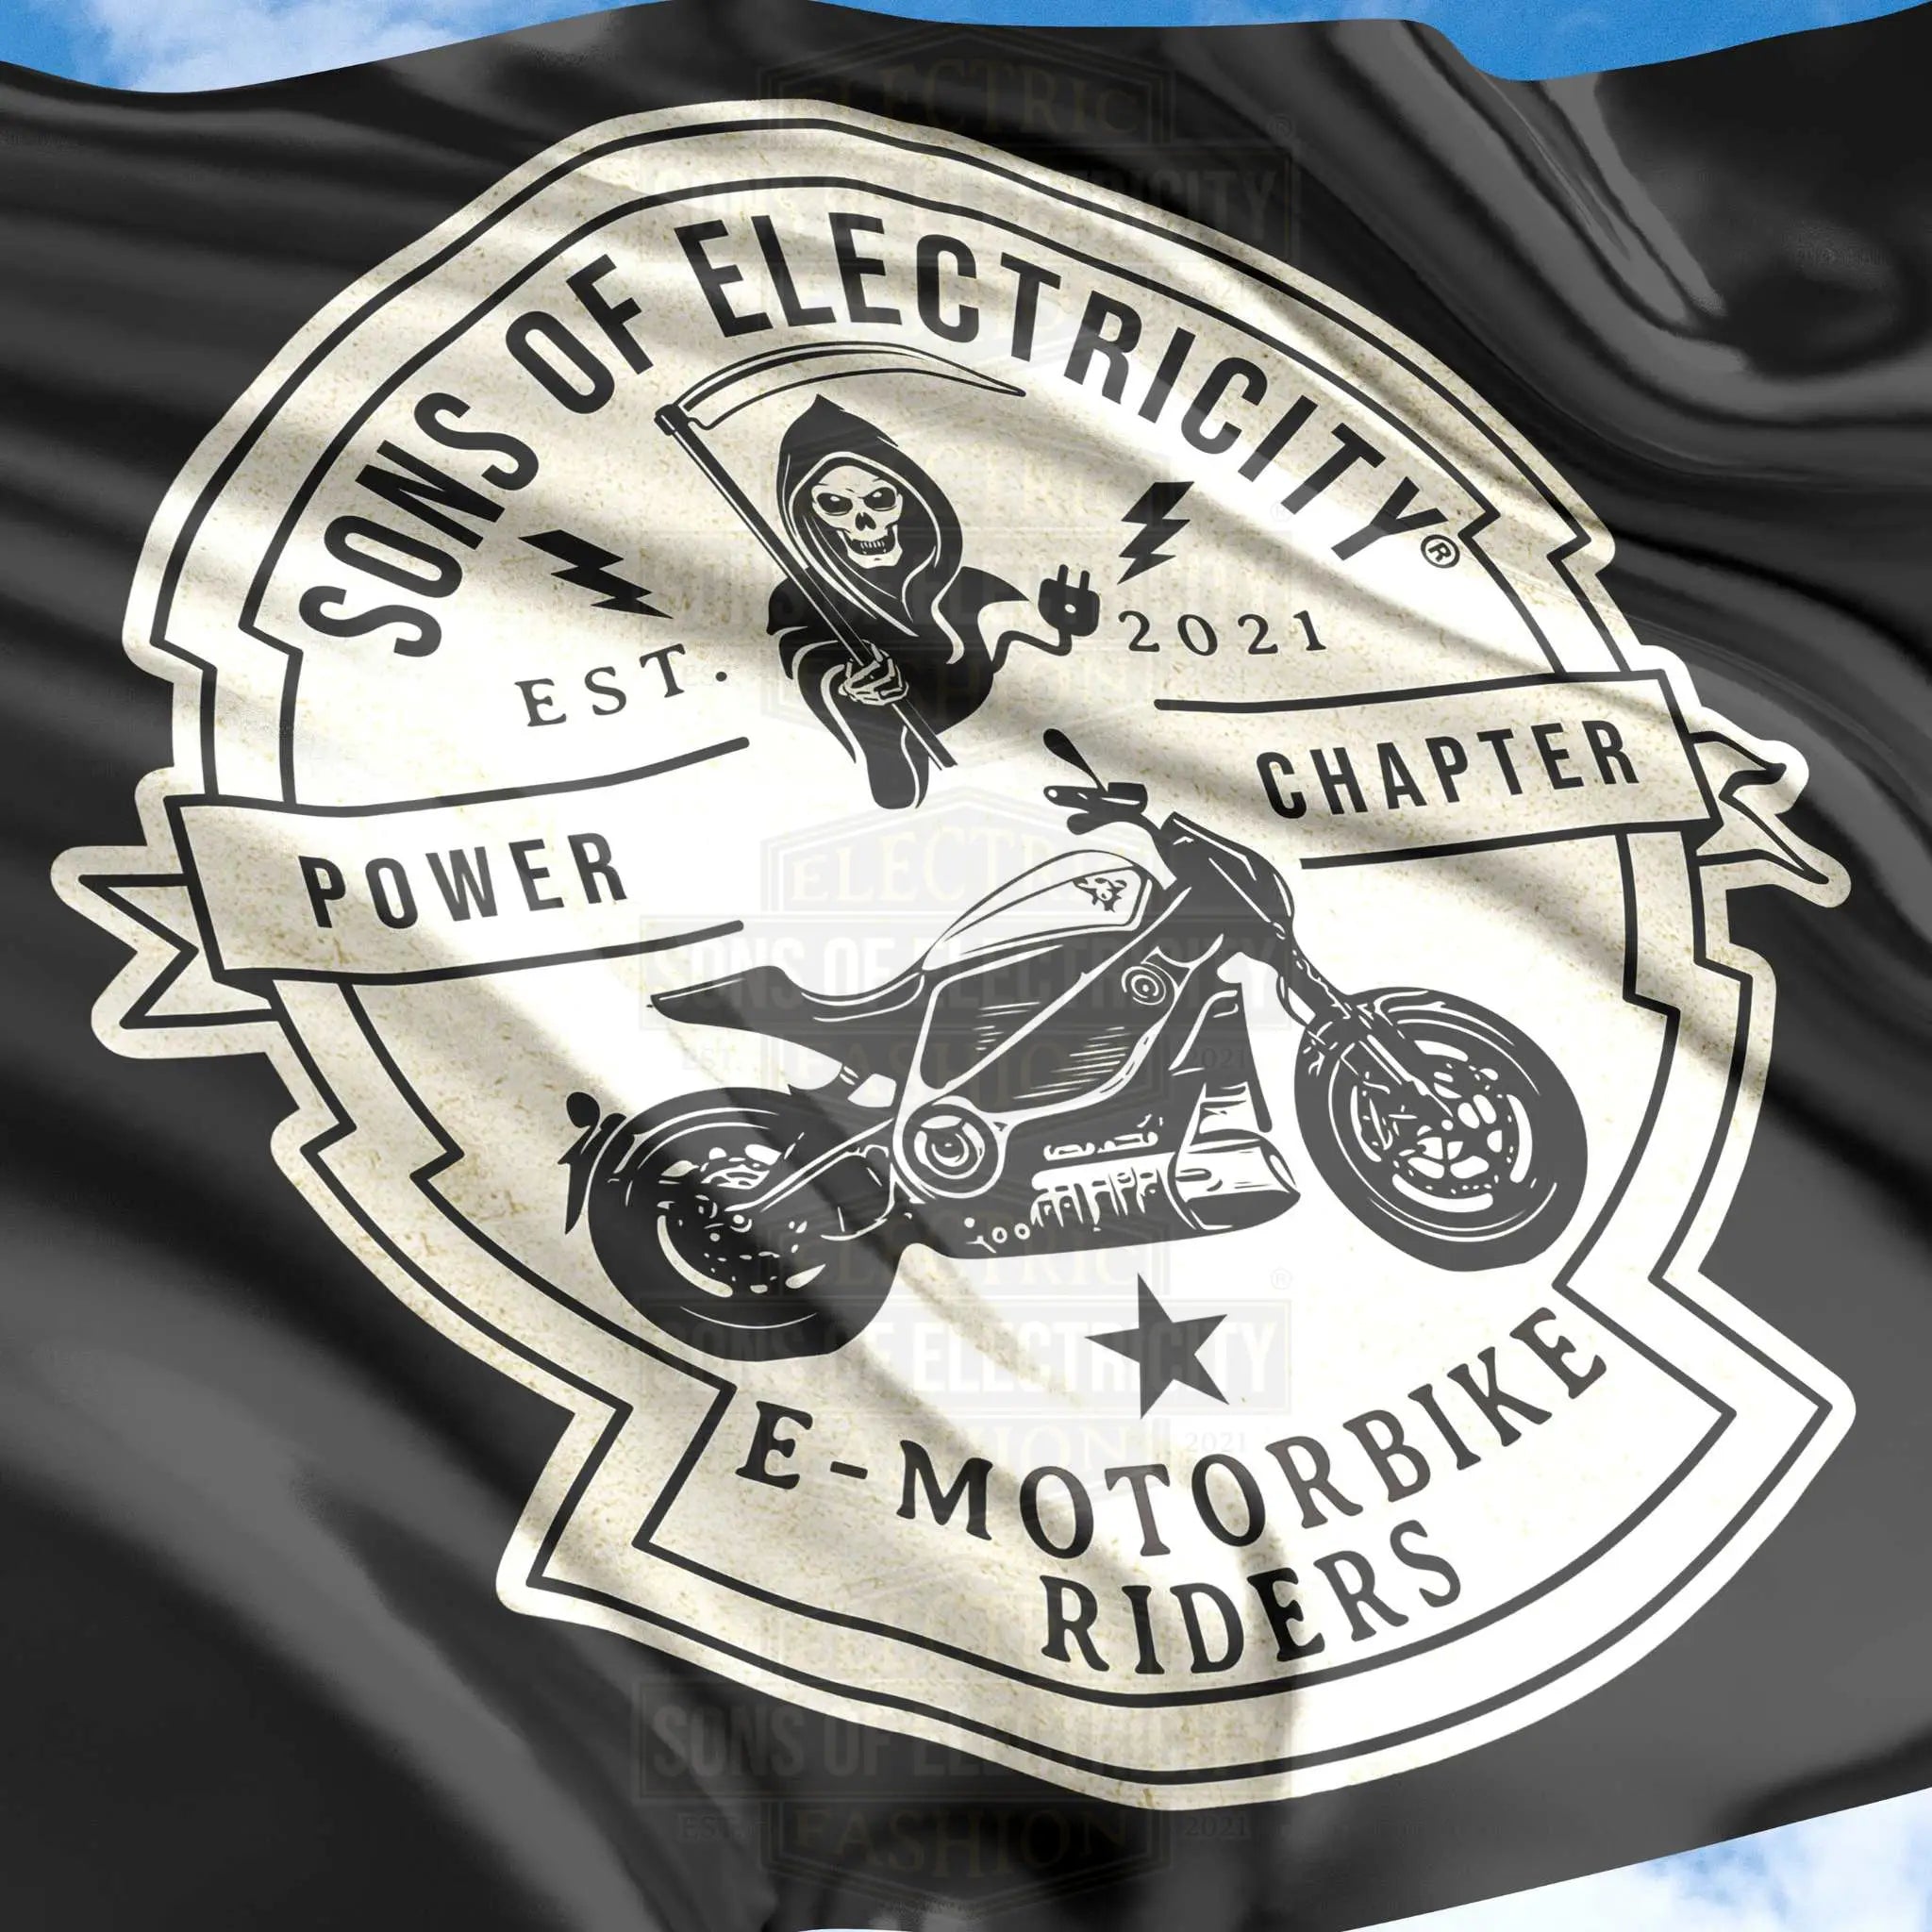 SONS OF ELECTRICITY Hiss-Fahne - E-Motorbike Riders -